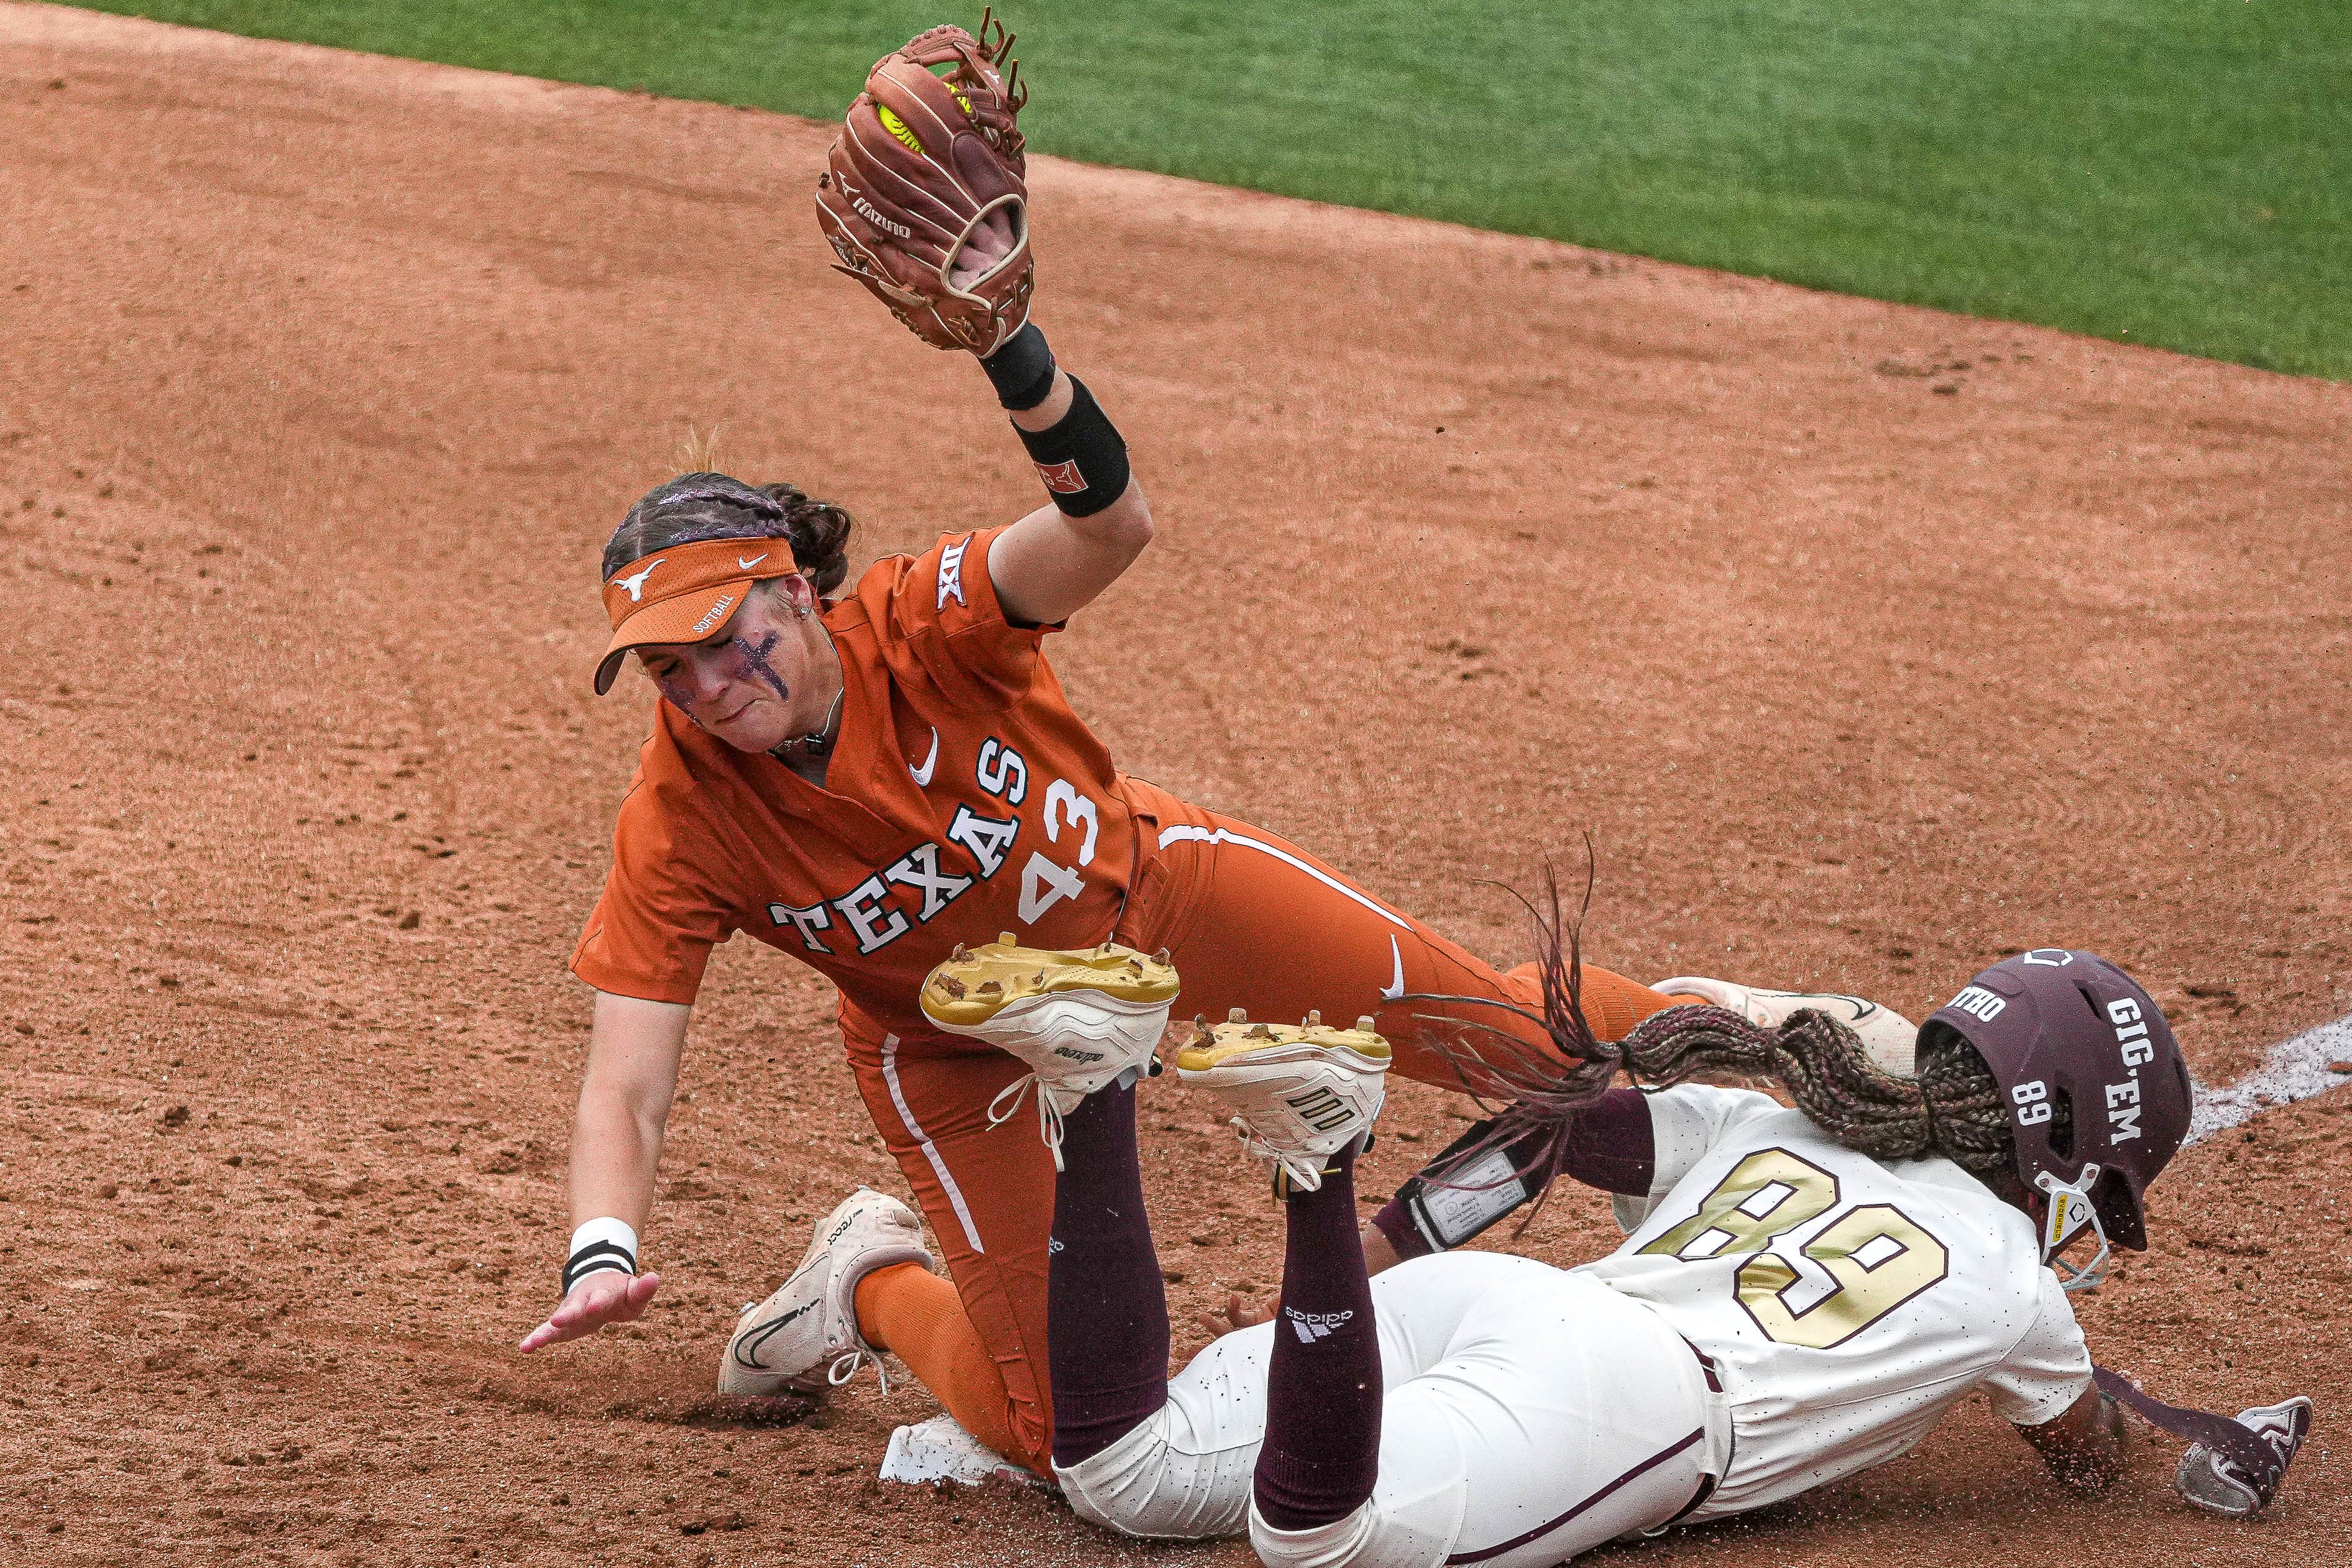 Texas softball will host Texas A&M in NCAA Tournament. When and where do they play?